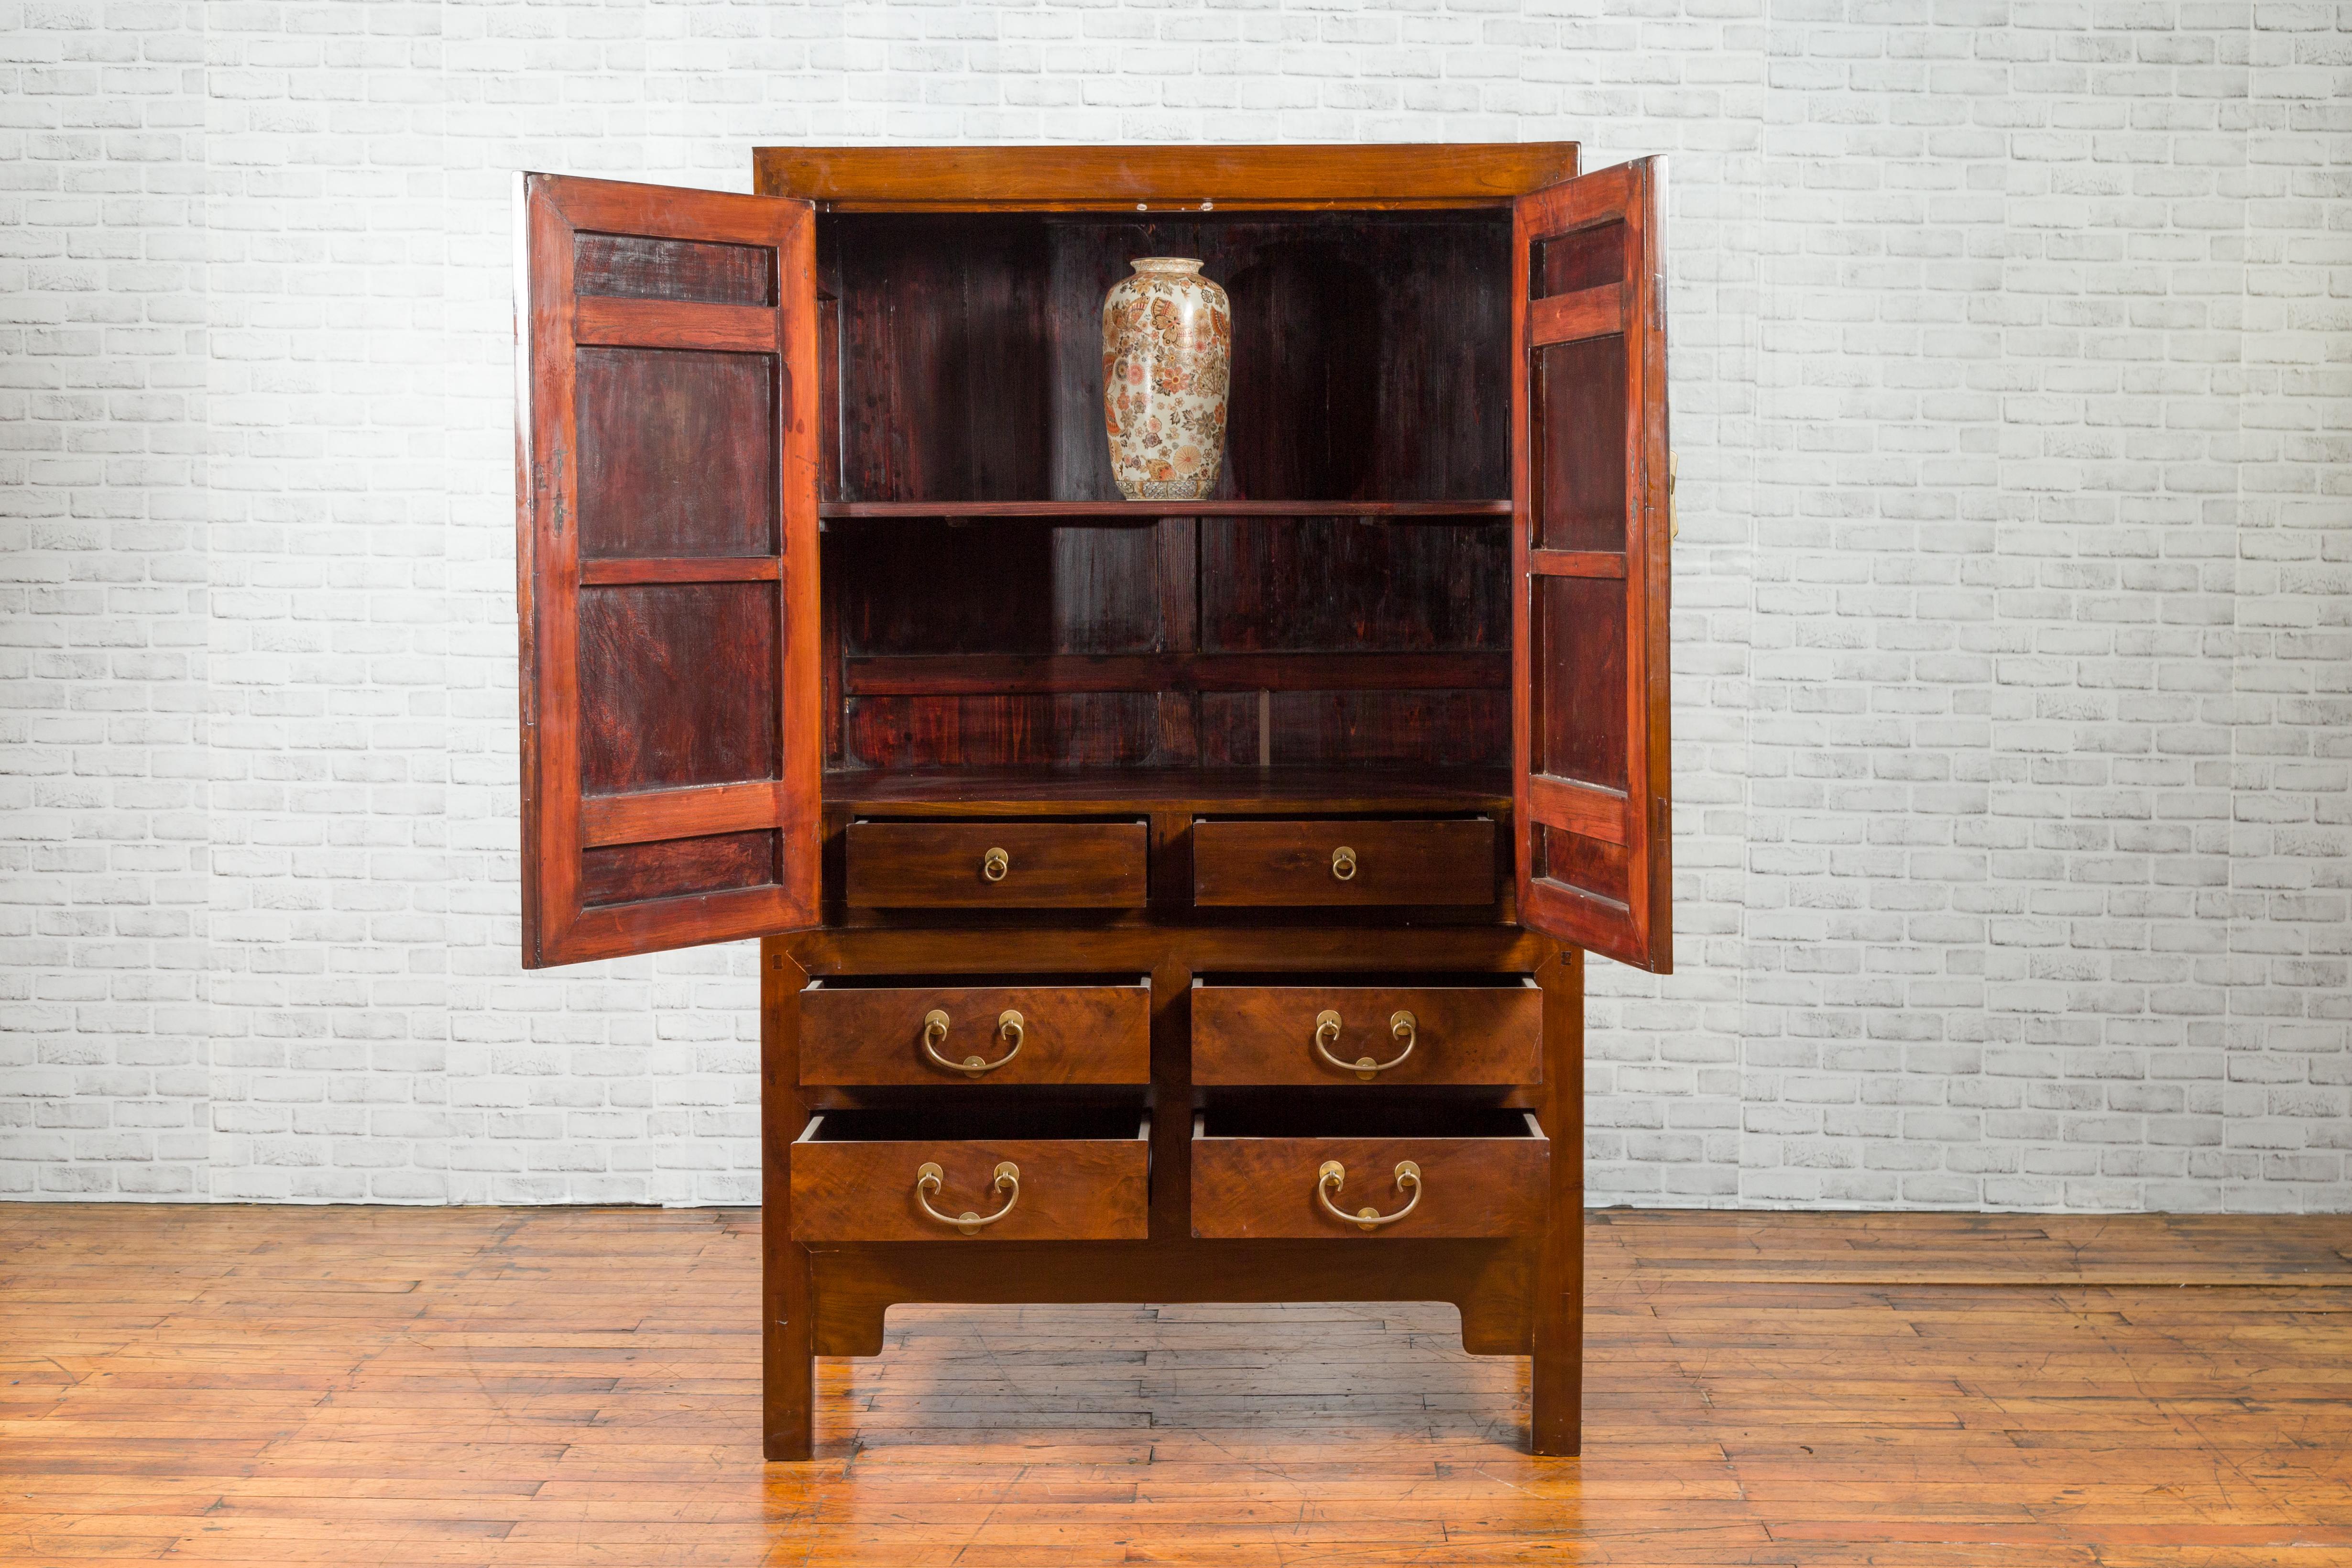 Chinese 1920s-1930s Elm and Burl Cabinet with Doors, Drawers and Brass Hardware For Sale 5